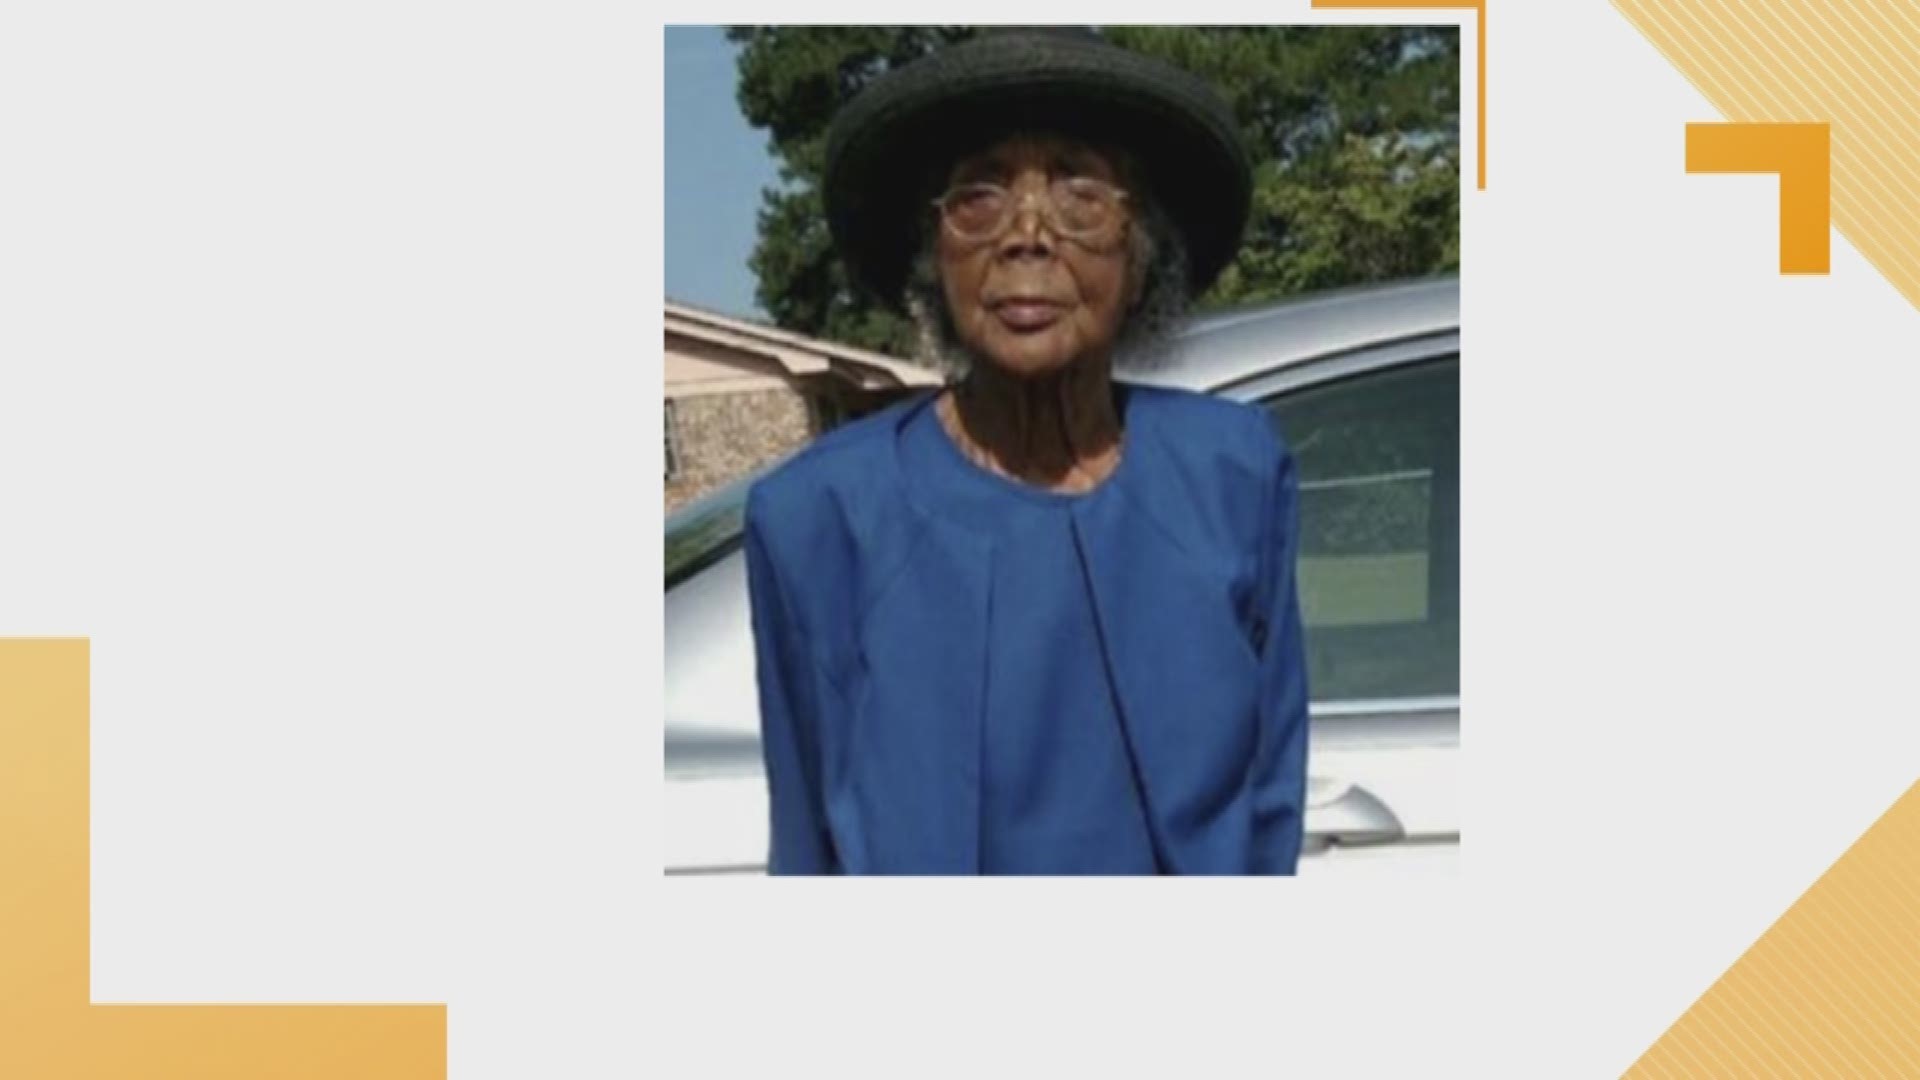 Join us in wishing Cora Pack a VERY HAPPY 100th BIRTHDAY in Sumter County, where she has worshipped at Enon Missionary Baptist Church for more than 50 years and her grandchildren and great-grandchildren light up her life!